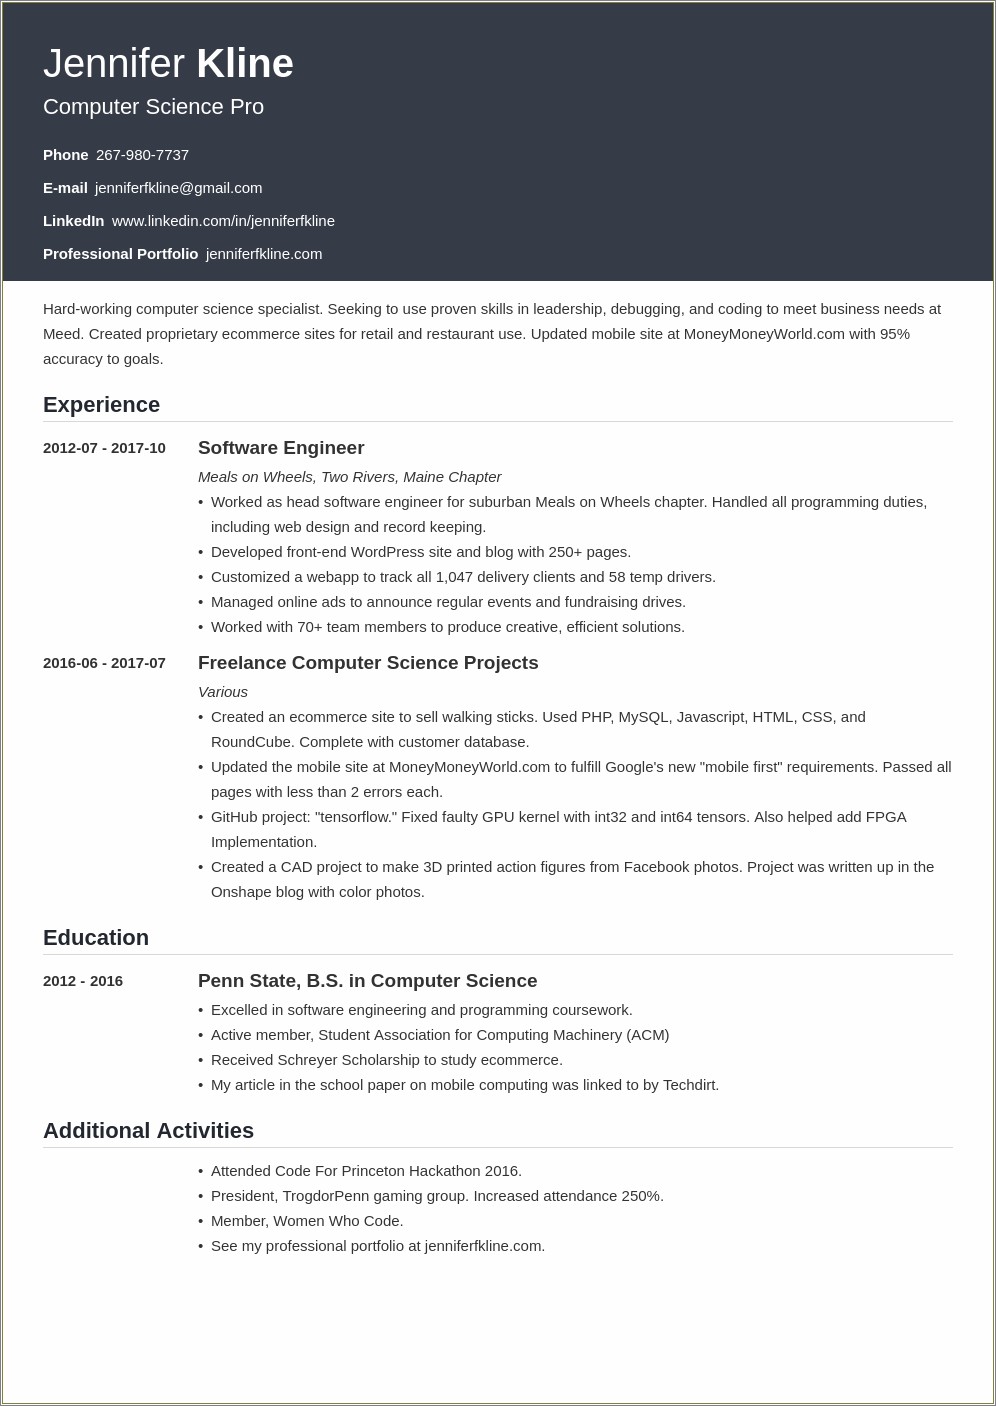 Do You Put Volunteer Experience On Resume